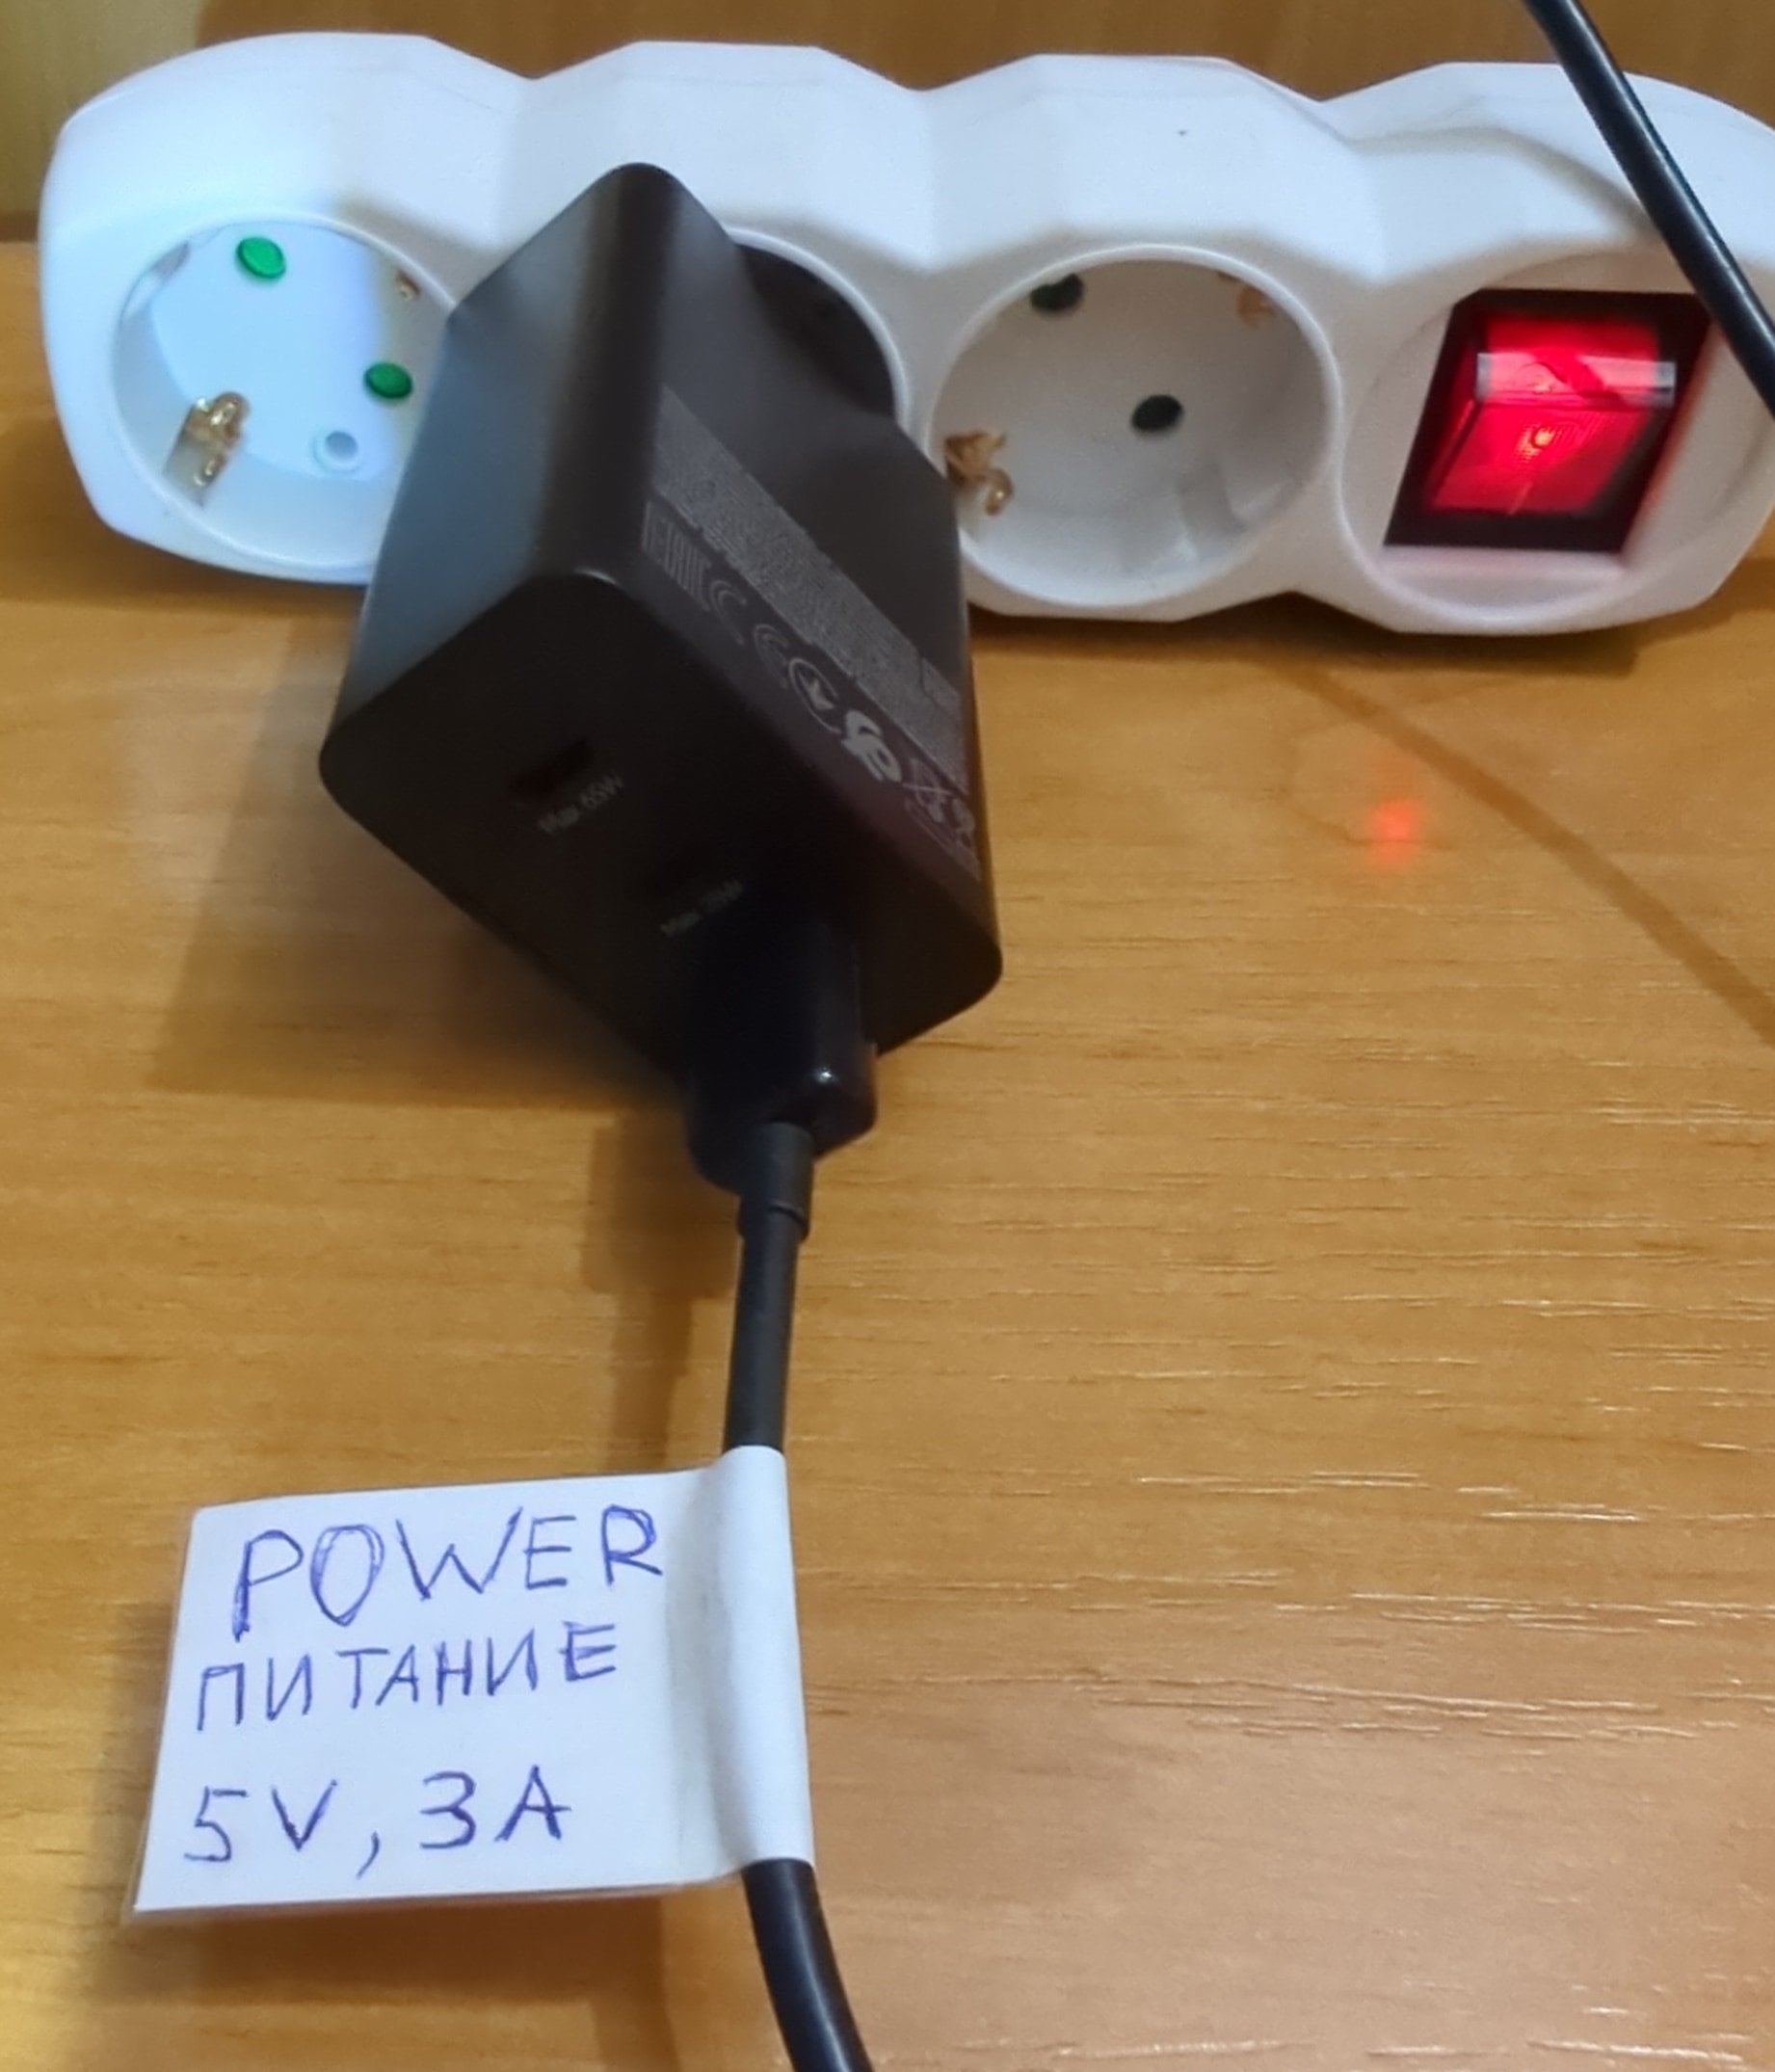 USB-A power cable connected to the power 5V 3A adapter.